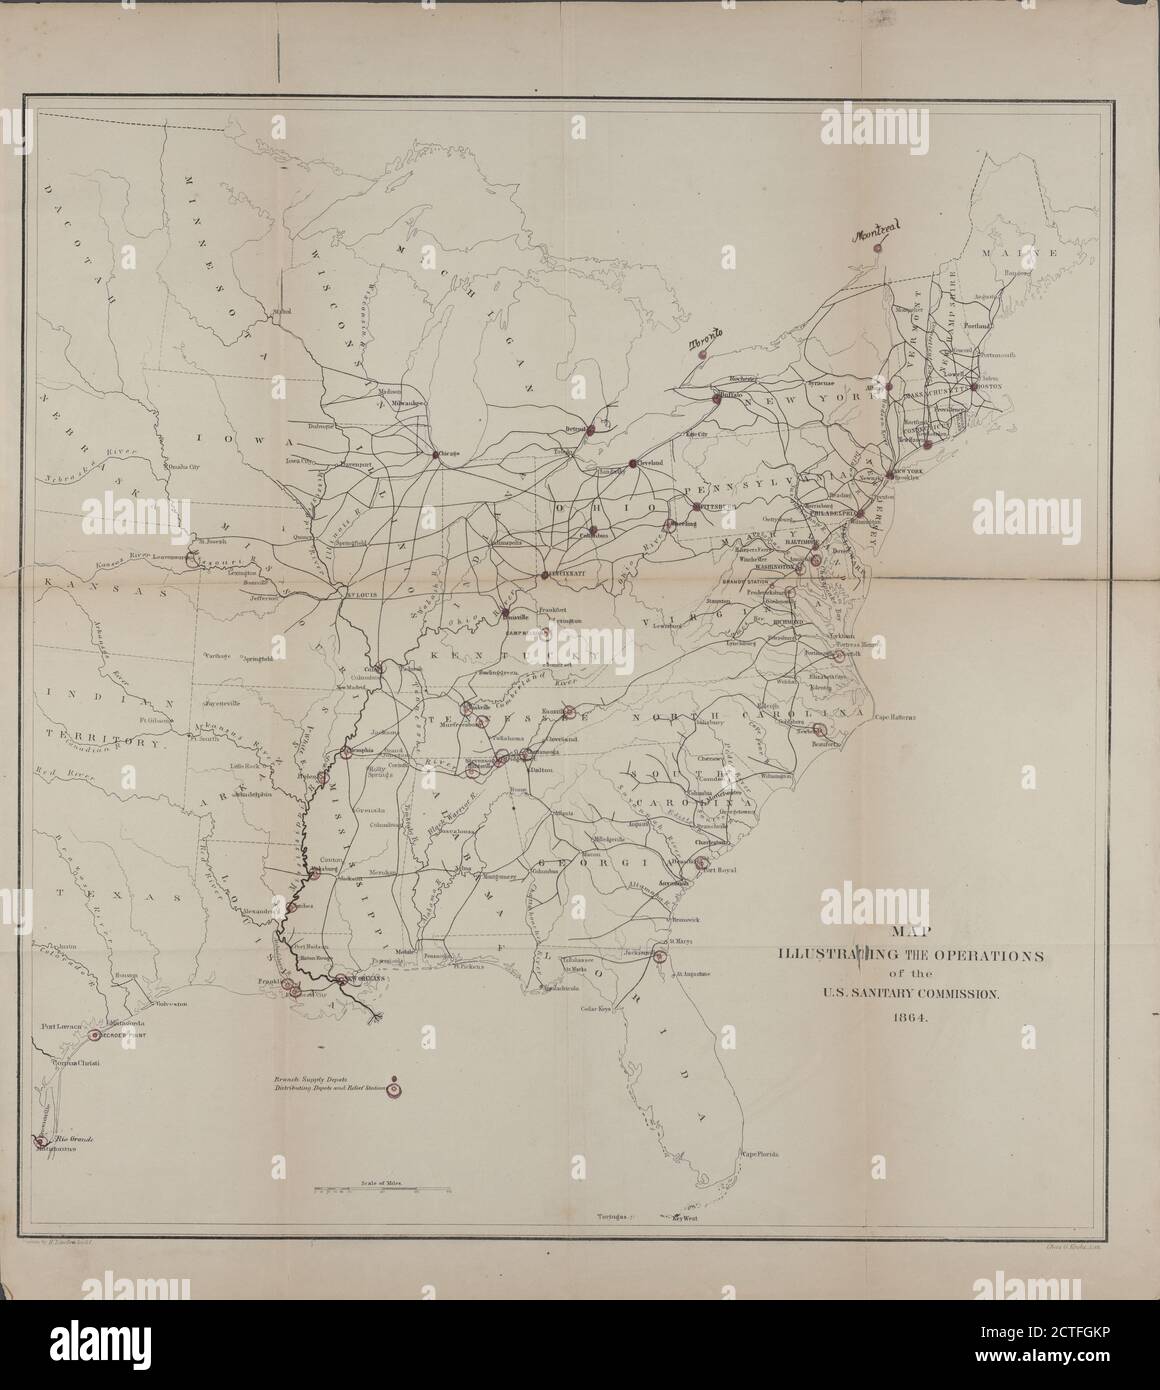 Map illustrating the operations of the U.S. Sanitary Commission, cartographic, Maps, 1864, United States Sanitary Commission, Krebs, Charles G., Lindenkohl, H. (Henry Stock Photo